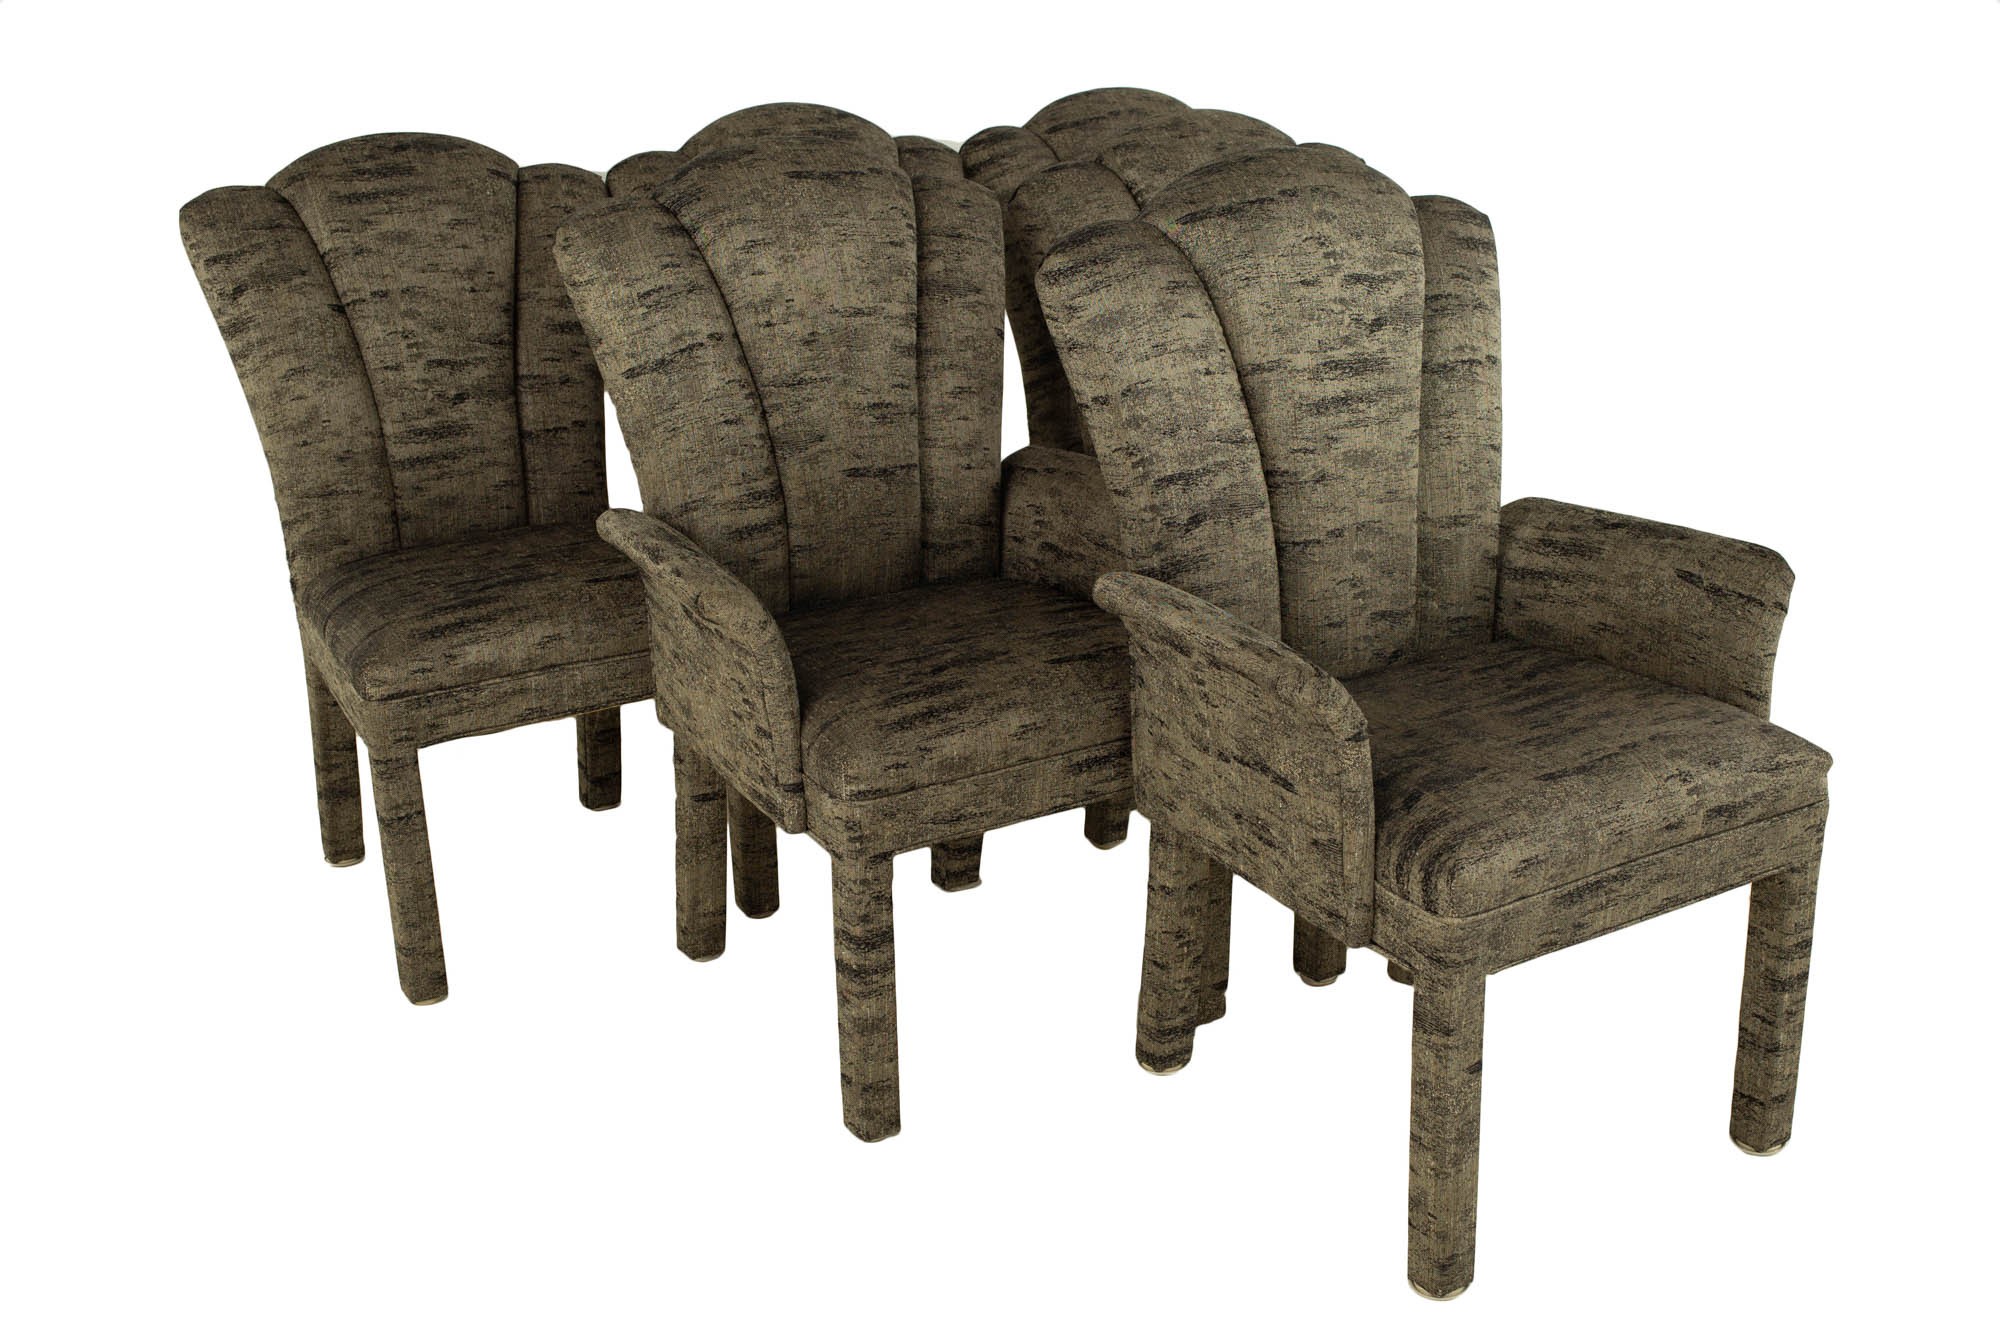 Post Modern Fully Upholstered Dining Chairs - Set of 6